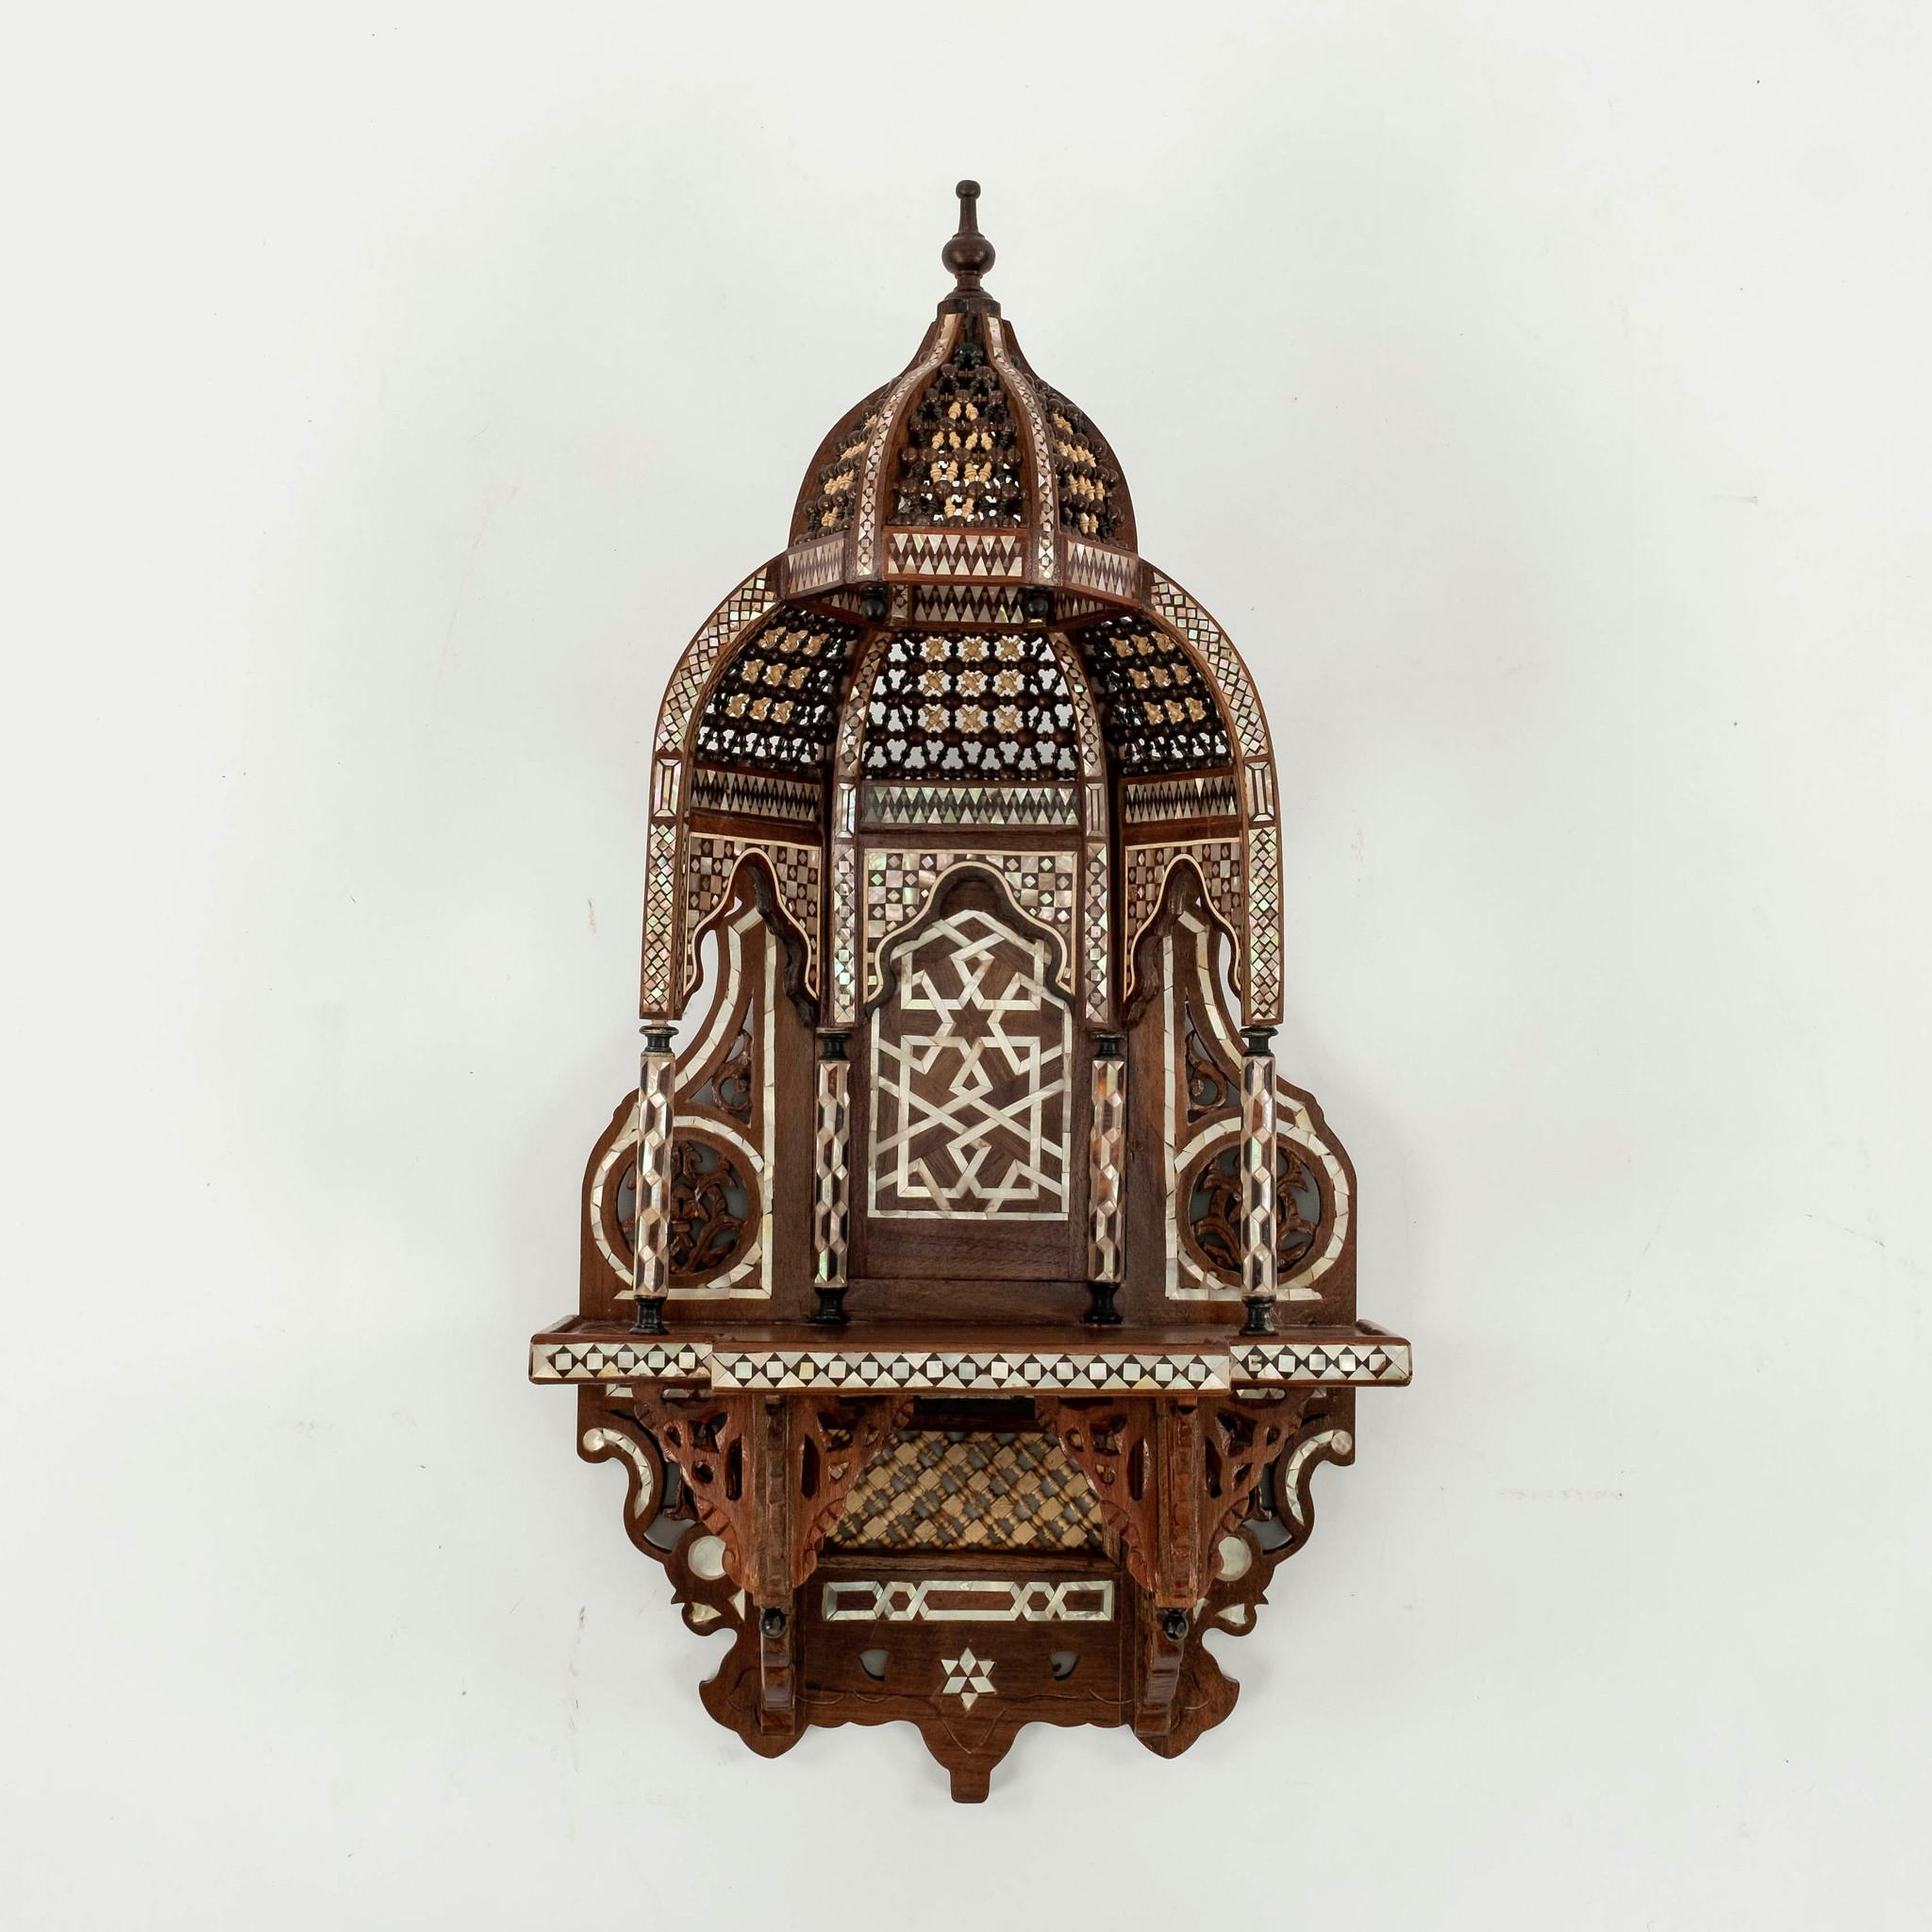 Pair 1920s or earlier Moroccan wood and mother of pearly inlay wall shelves. These wonderful Múdejar design shelves feature abstract geometry, horseshoe and multifoil arches, and honeycombed vaults called muqarnas supported by miniature columns.